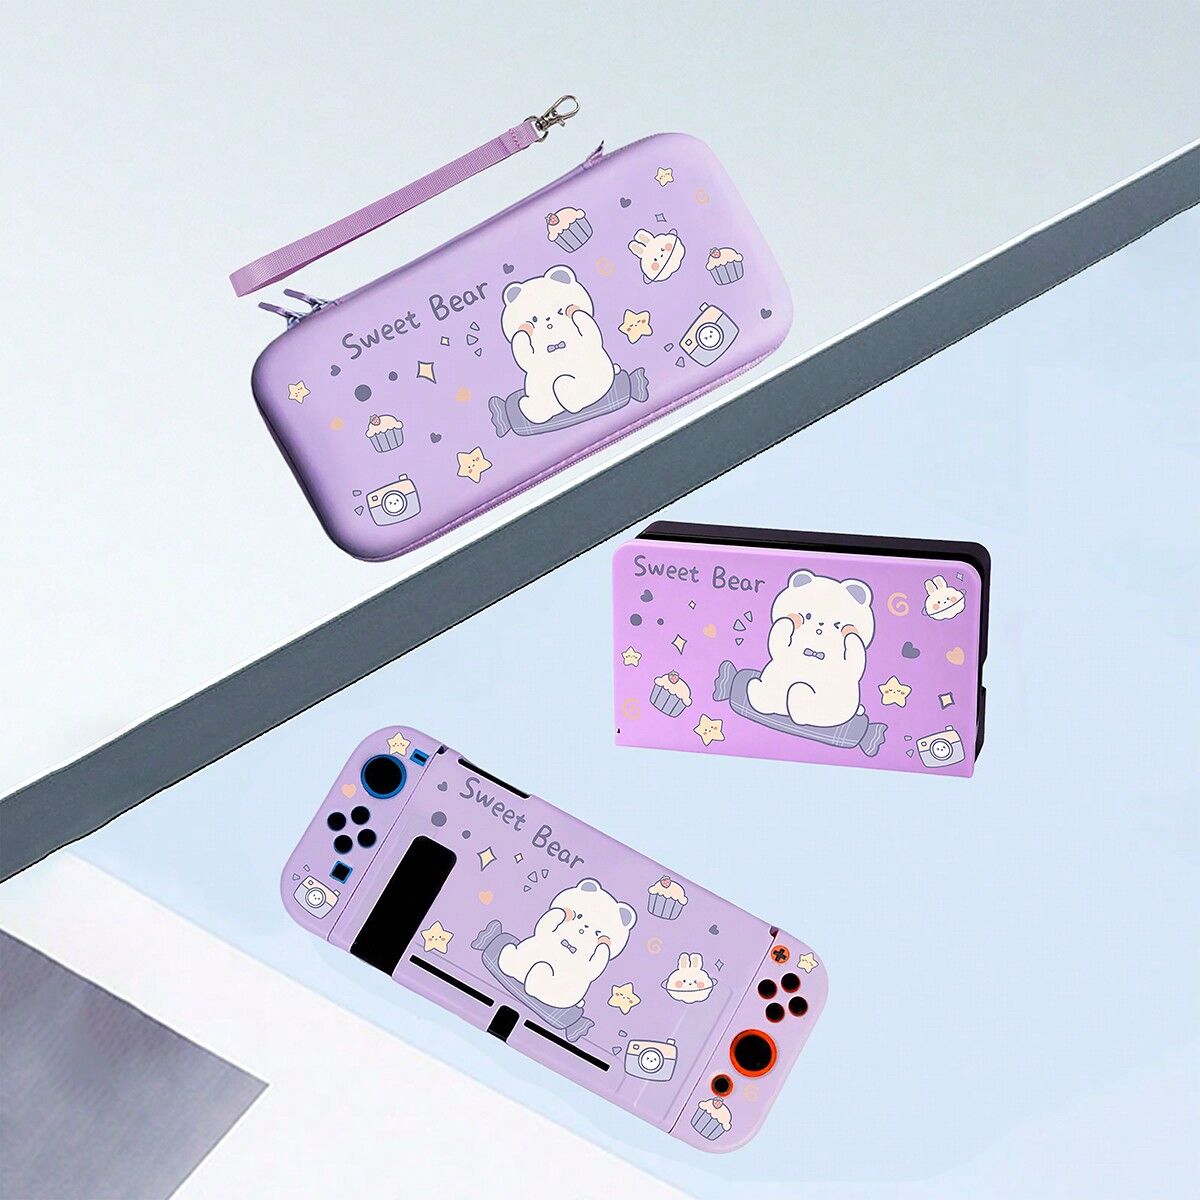 SHEIN 3pcs Cartoon Purple Switch Carrying Case, Protective Cover For Joy-con & Console, Game Accessory Purple Nintendo Switch